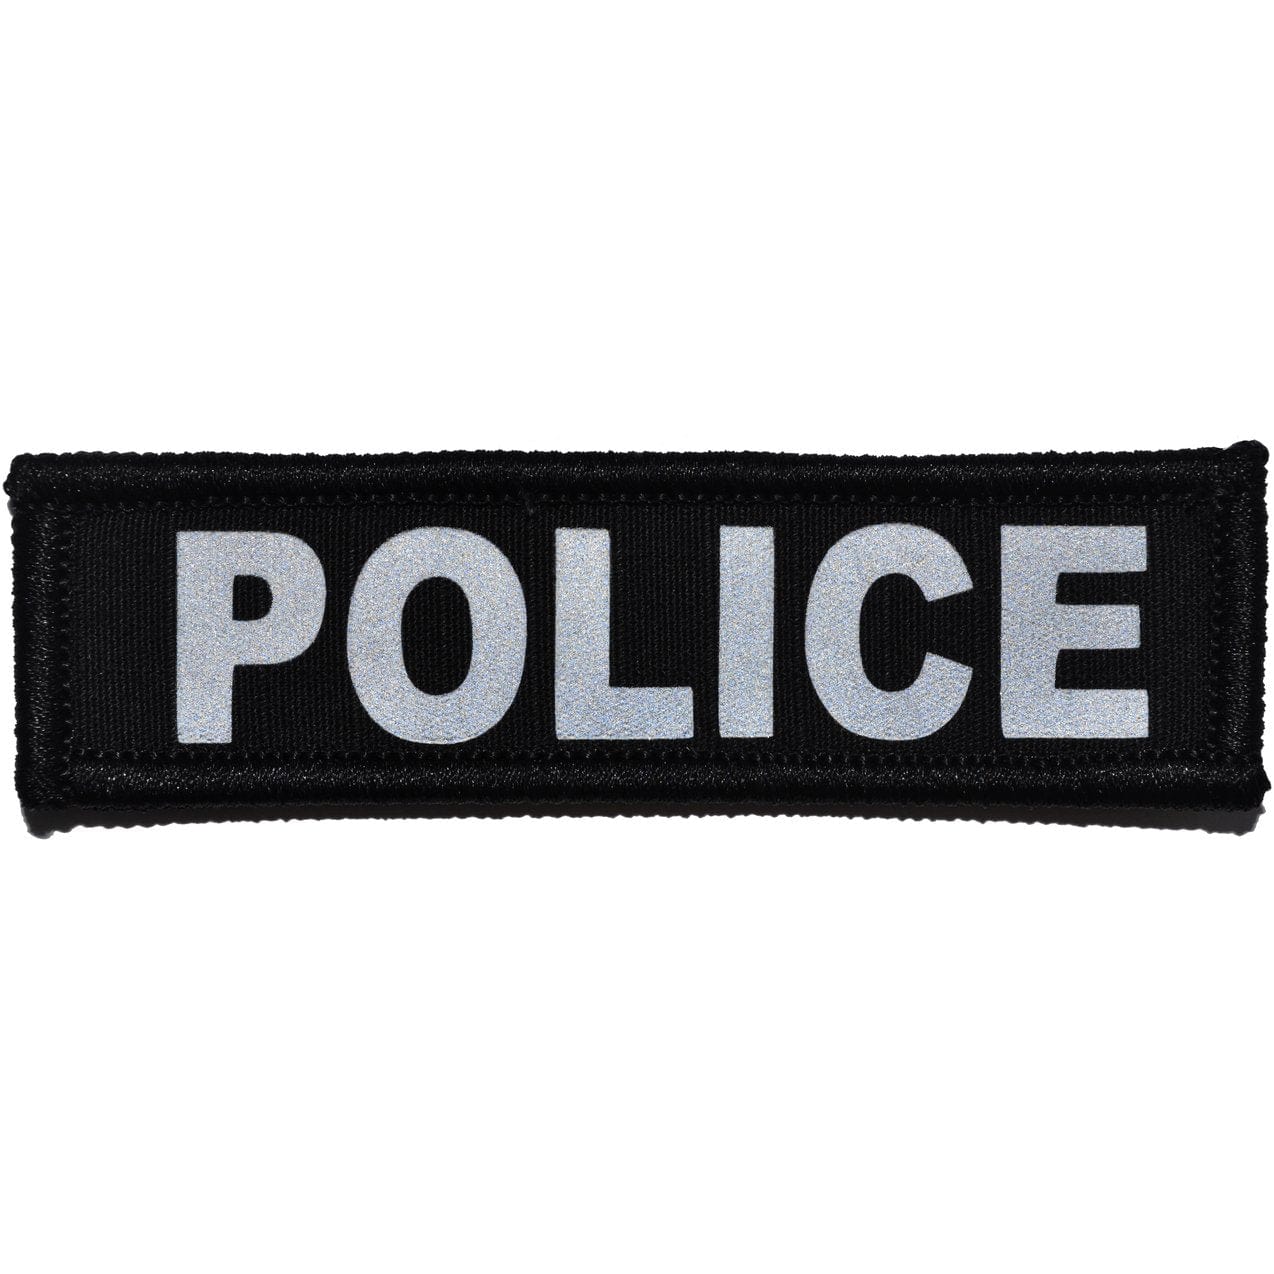 Police Reflective - 1x3.75 Patch Black | Tactical Gear Junkie